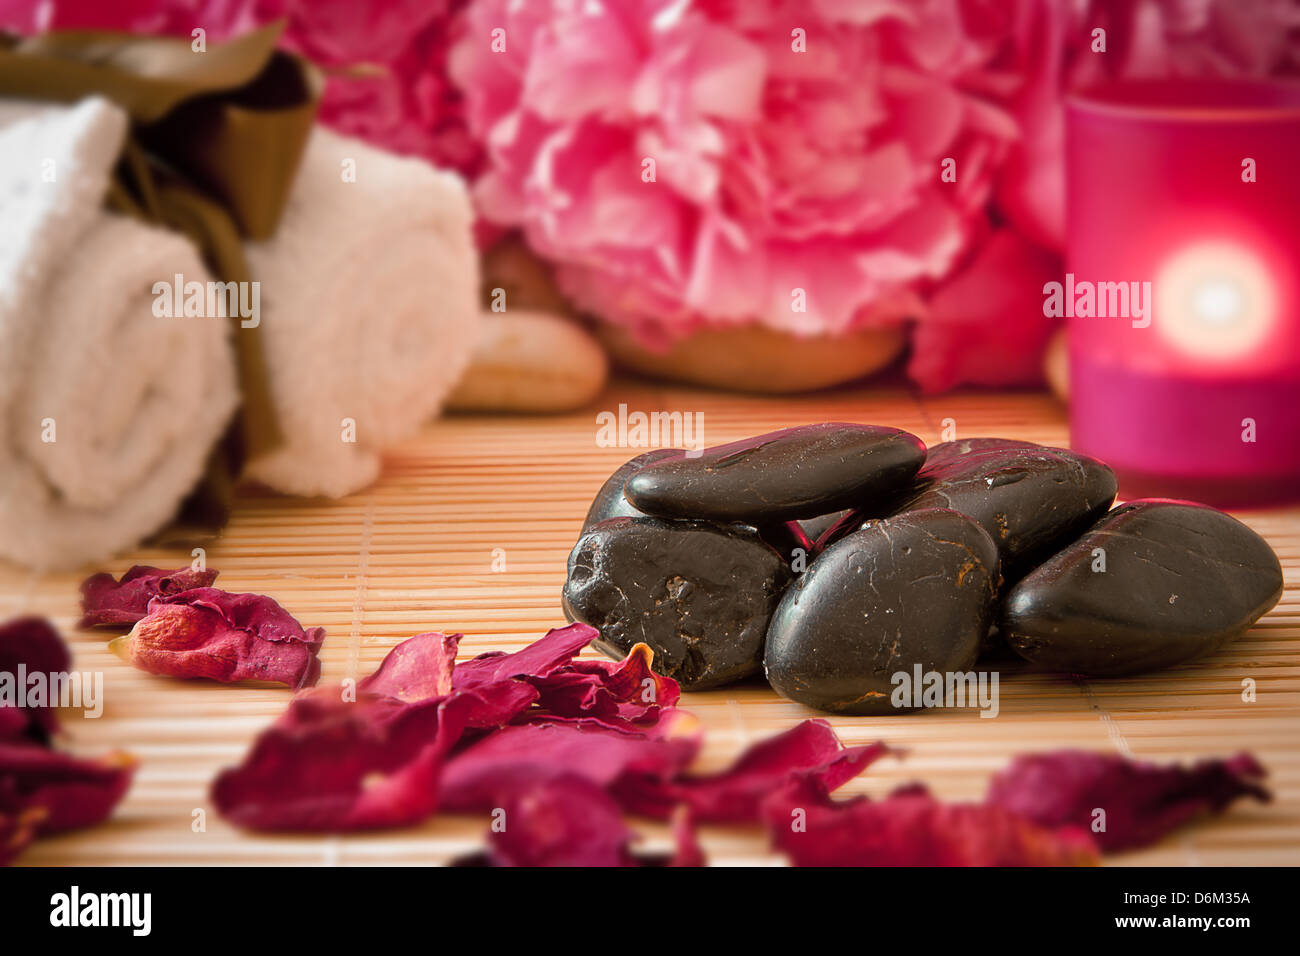 pink flower salt peony essential oil for spa and aromatherapy Stock Photo -  Alamy